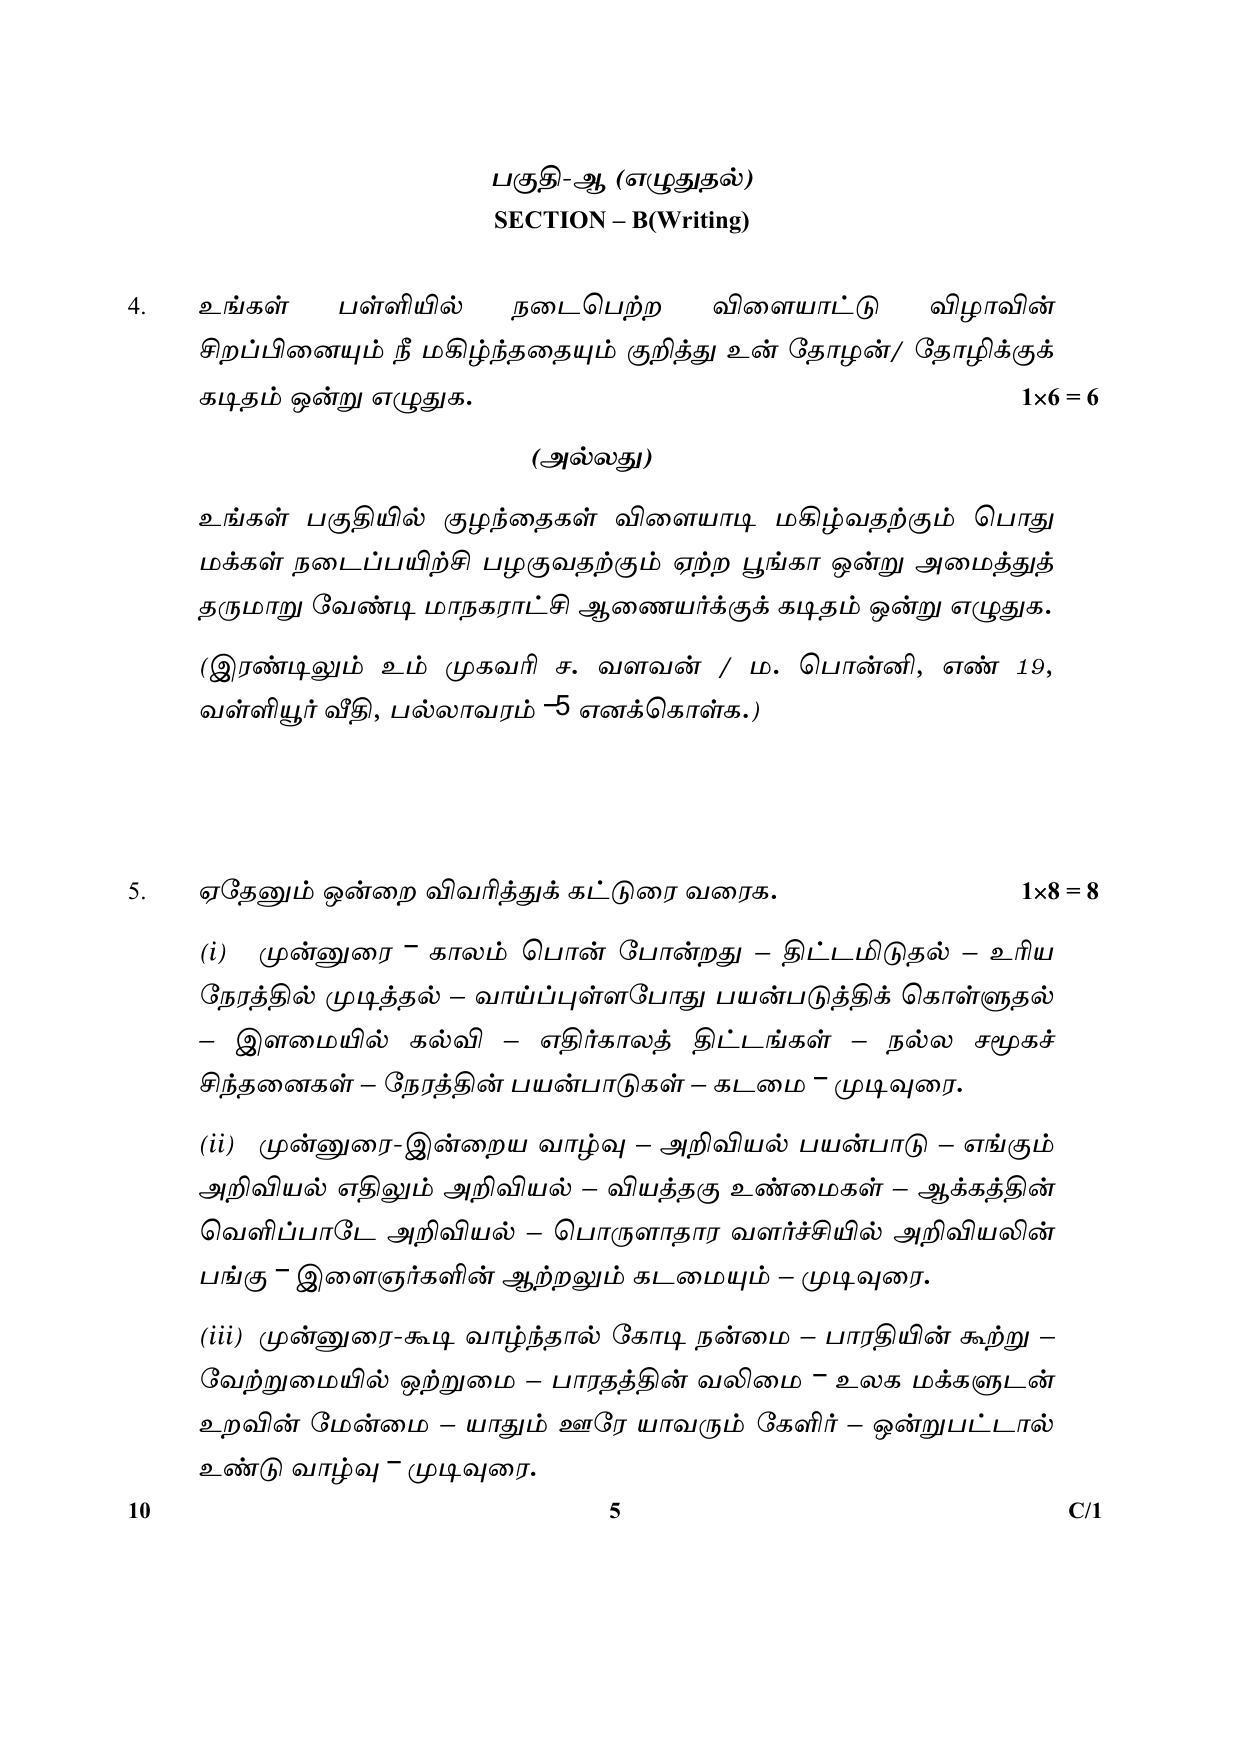 CBSE Class 10 10 (Tamil) 2018 Compartment Question Paper - Page 5